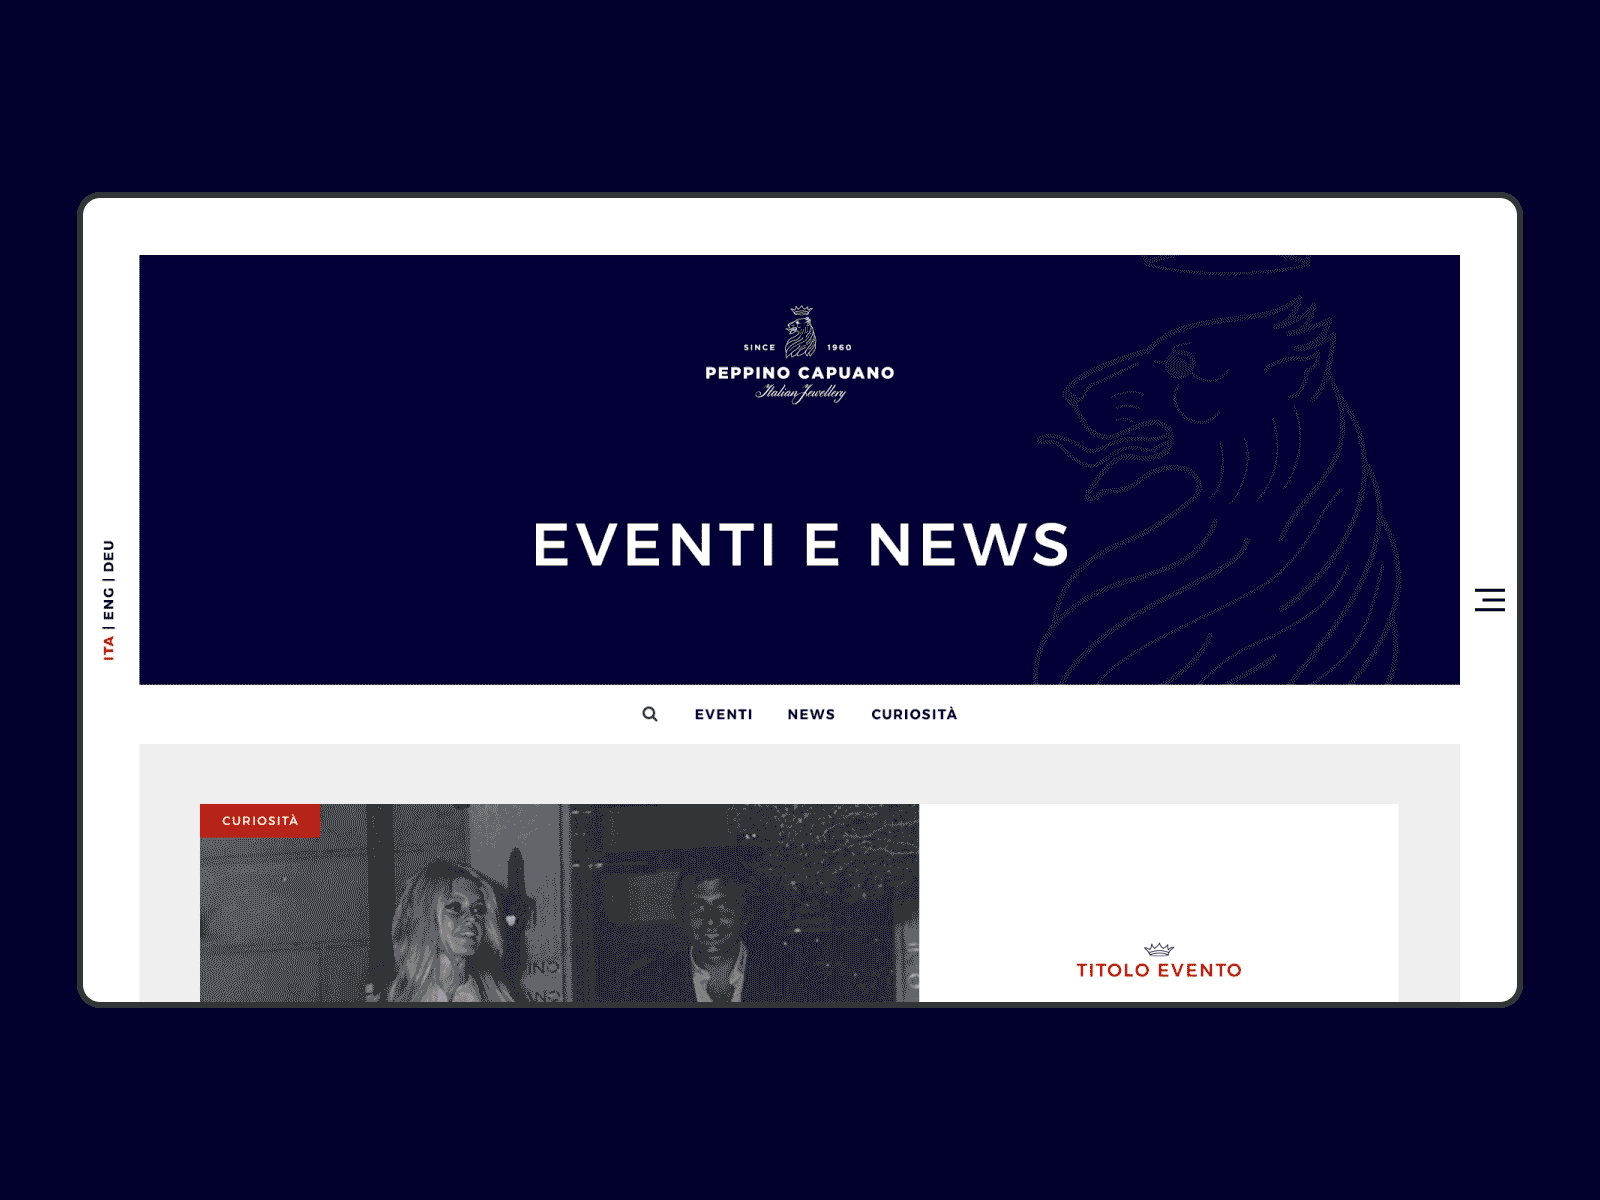 Events and News | Peppino Capuano adobe after effect adobe aftereffects animated mockup animation graphic design interaction design responsive design thanatos digital agency ui ui ux design uiux user inteface user interface design web design web mockup website design website mockup websites